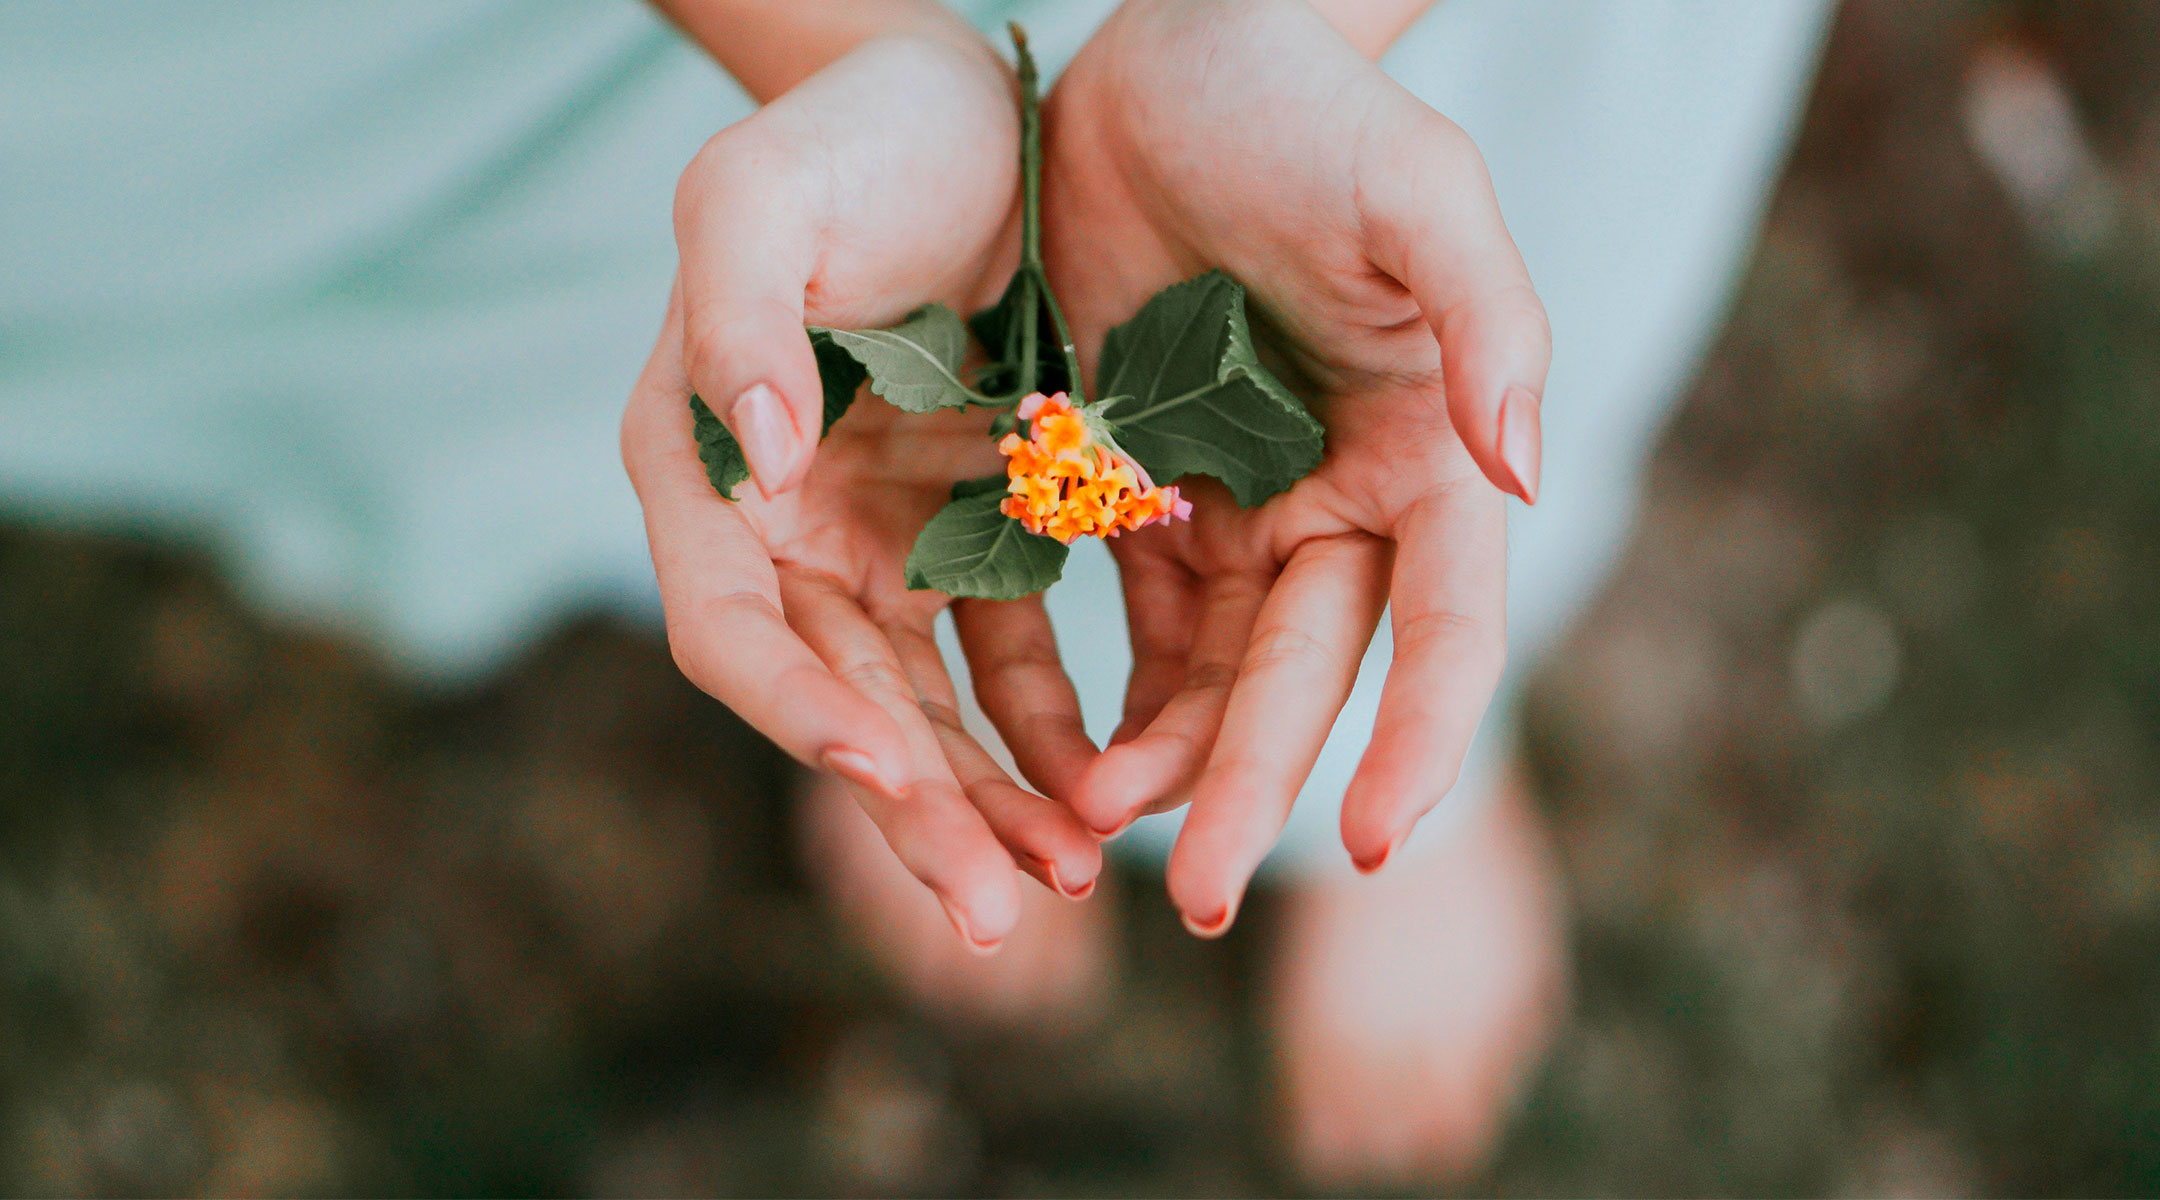 woman's hands holding small flowers